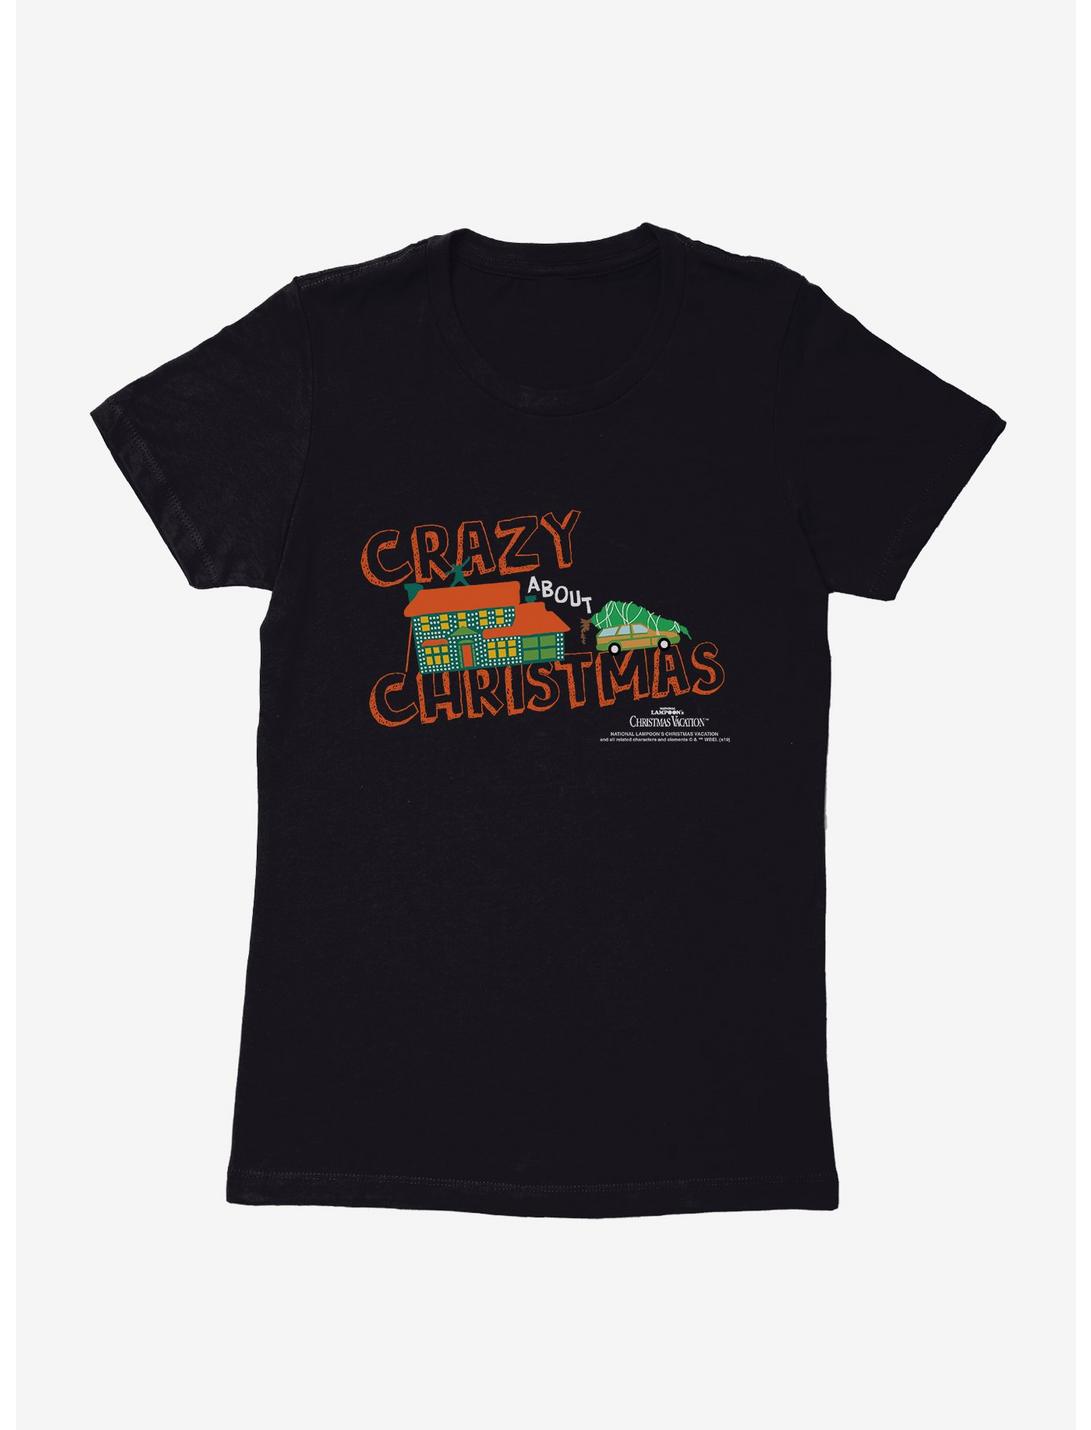 National Lampoon's Christmas Vacation About National Lampoon's Christmas Womens T-Shirt, BLACK, hi-res